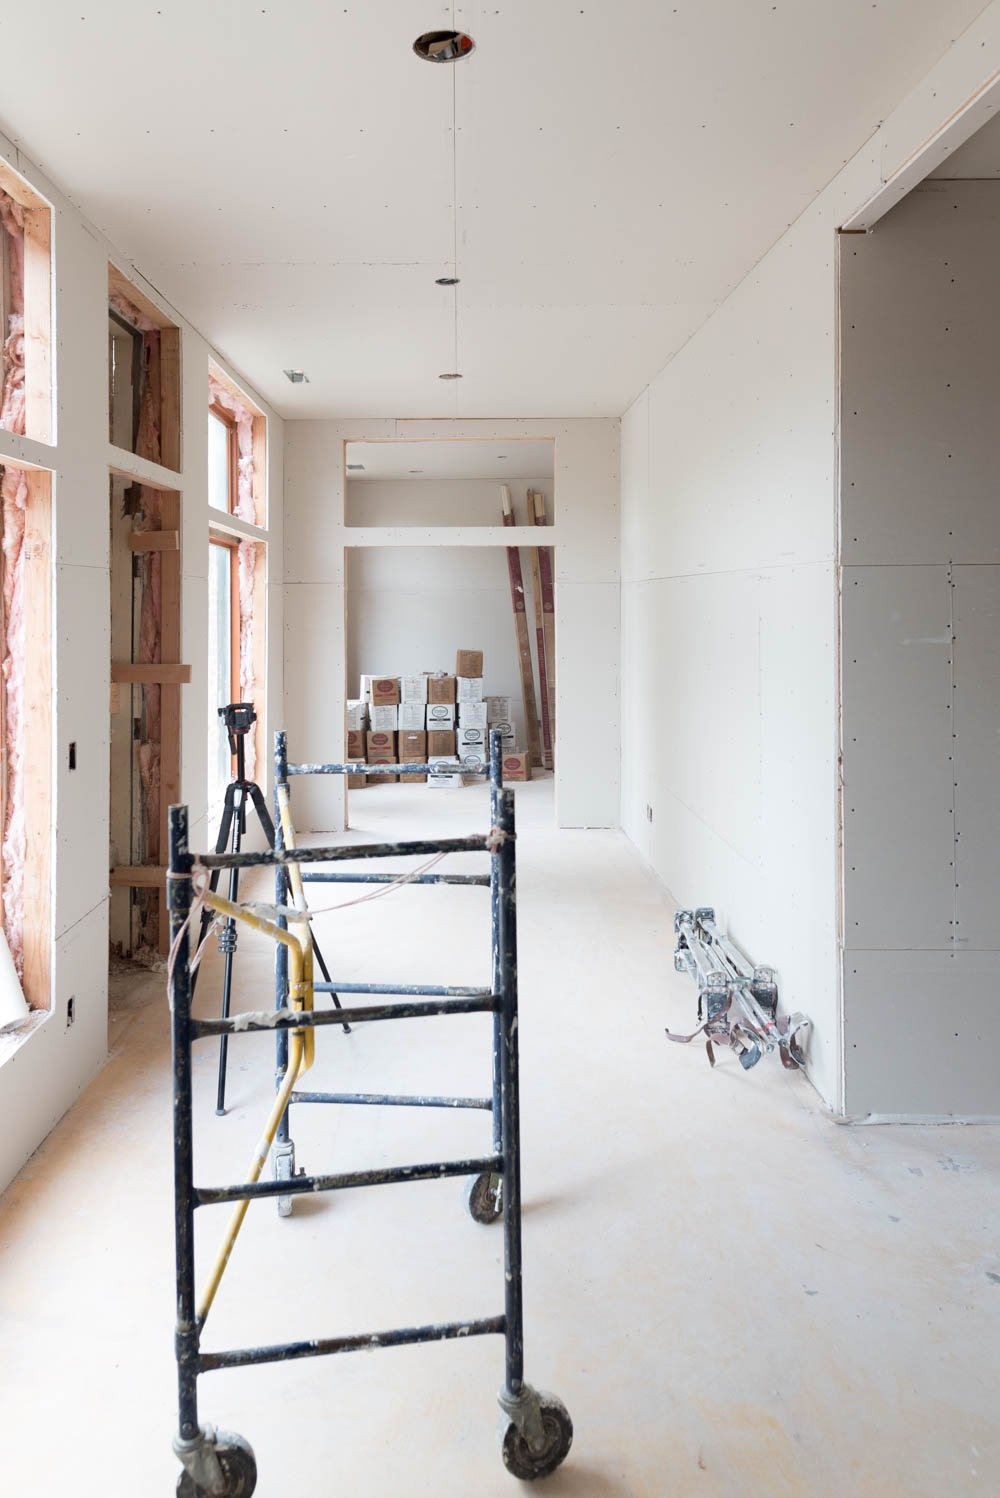 The Complete Guide to Drywall Installation and Wall Texture